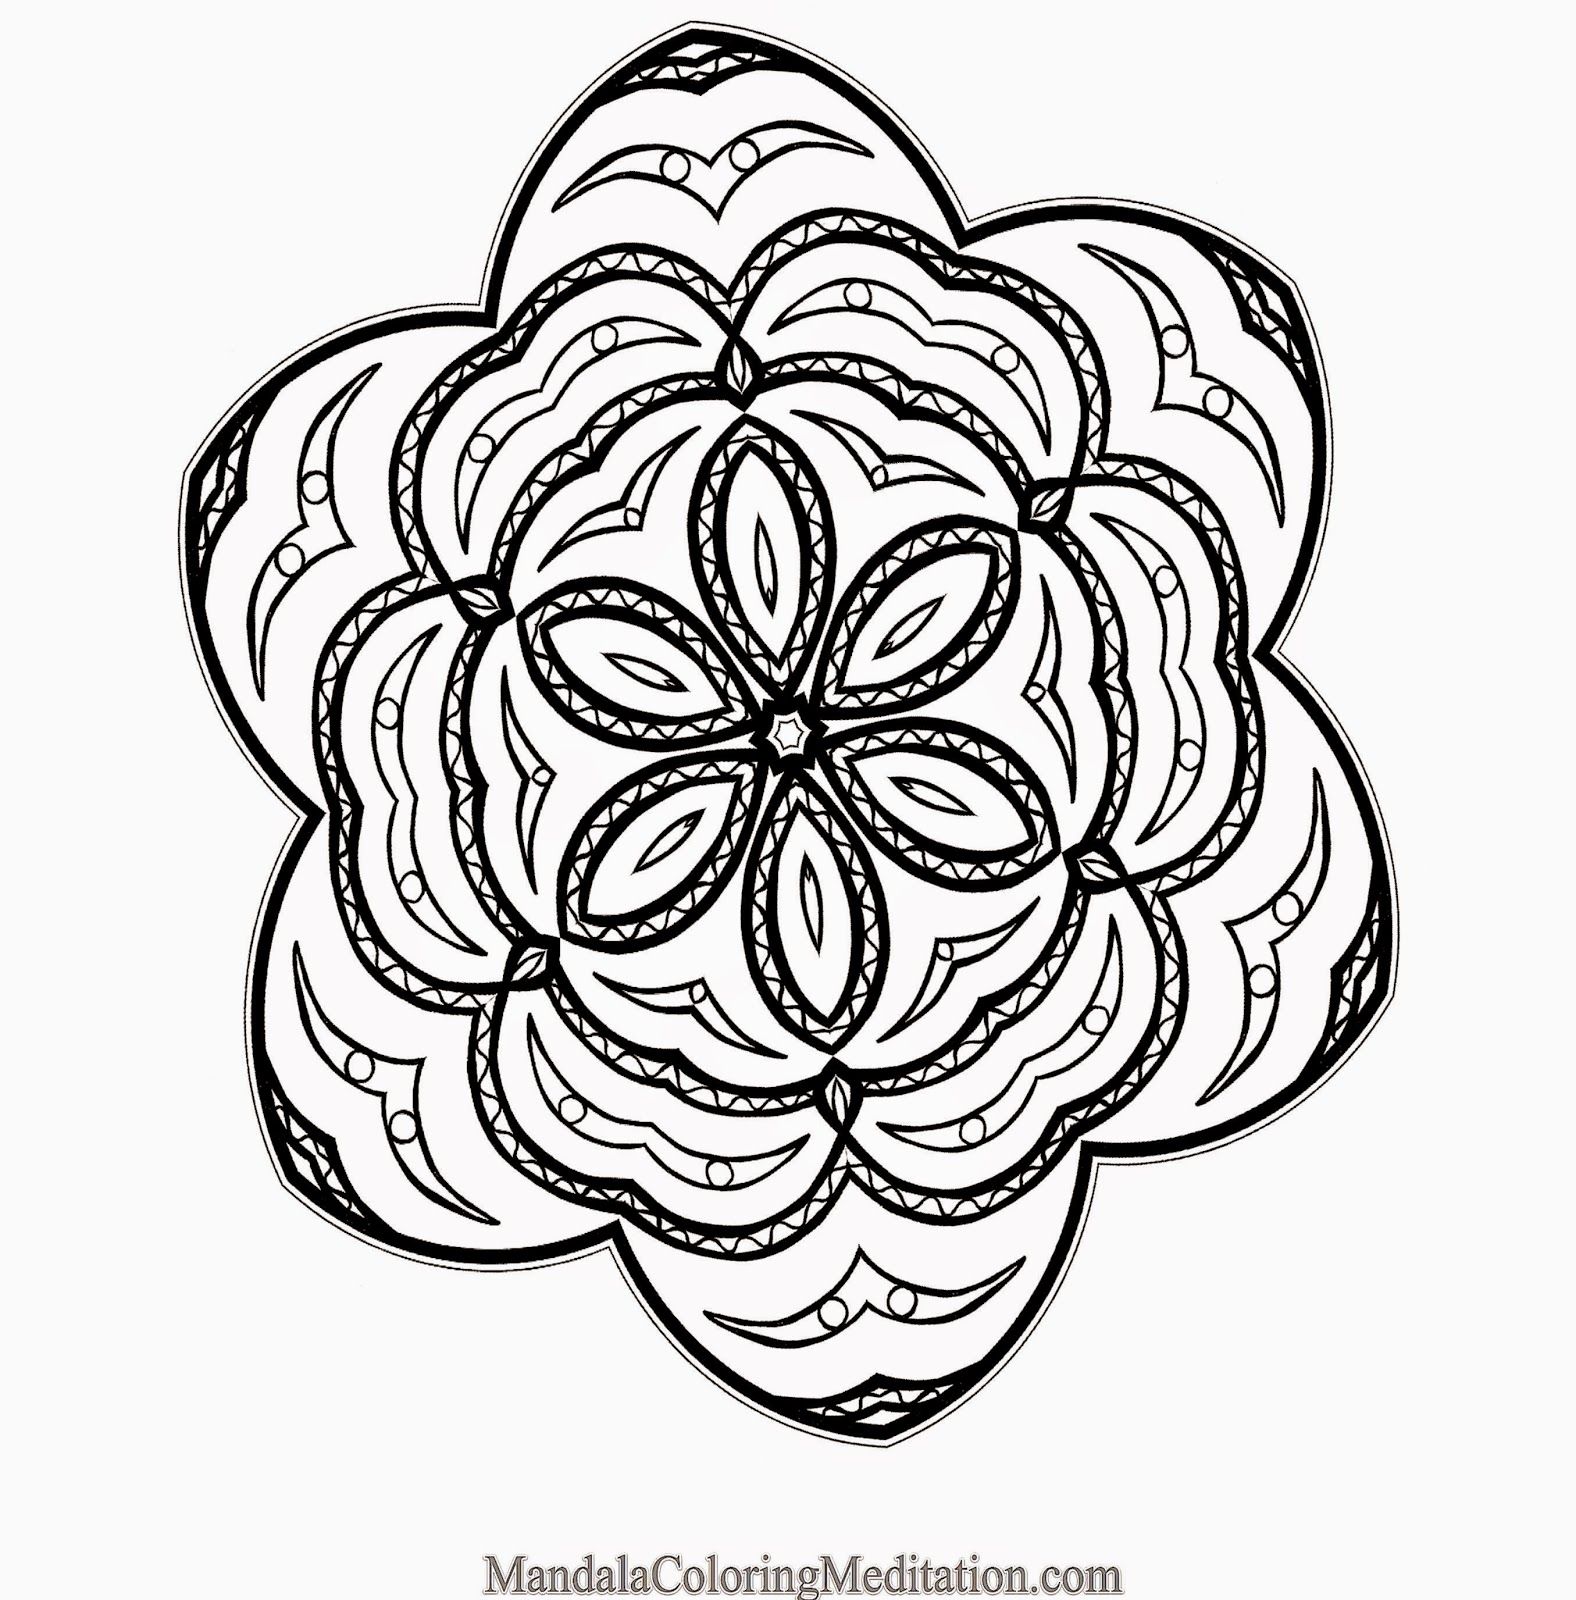 Free Printable Pictures To Color | Free Coloring Pictures